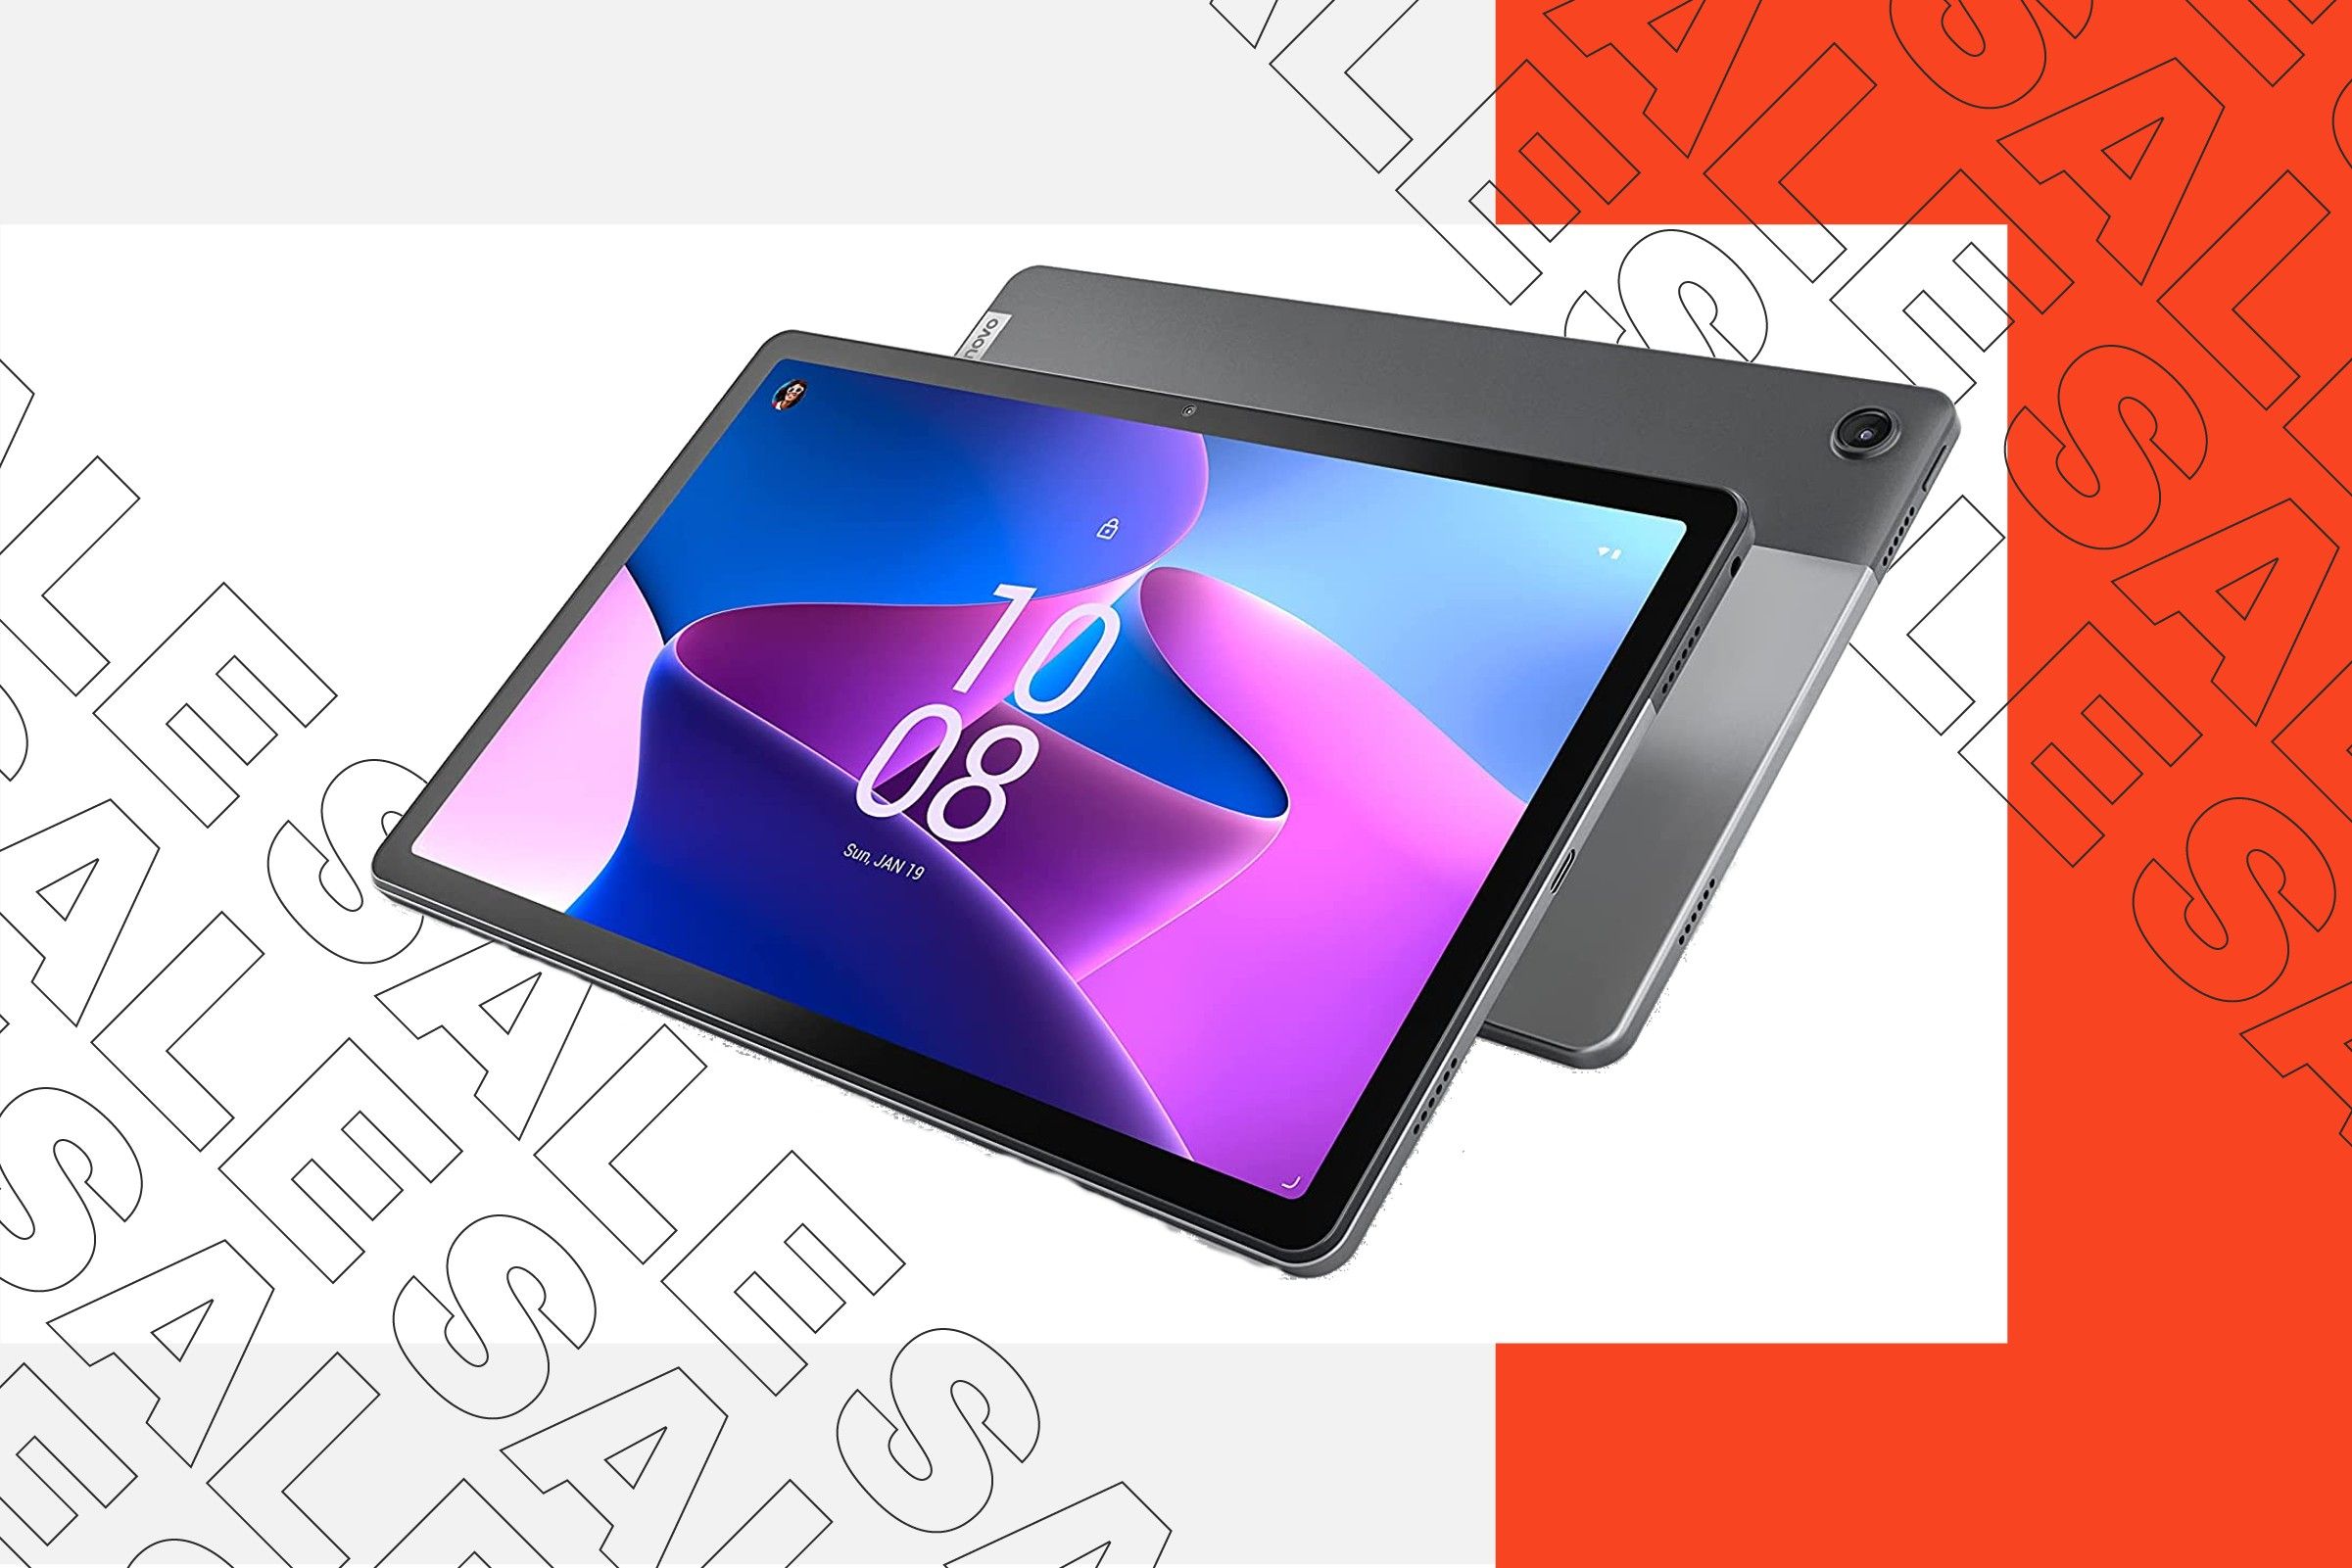 This $155 tablet deal for Black Friday is a cheap way to get some fun on the go